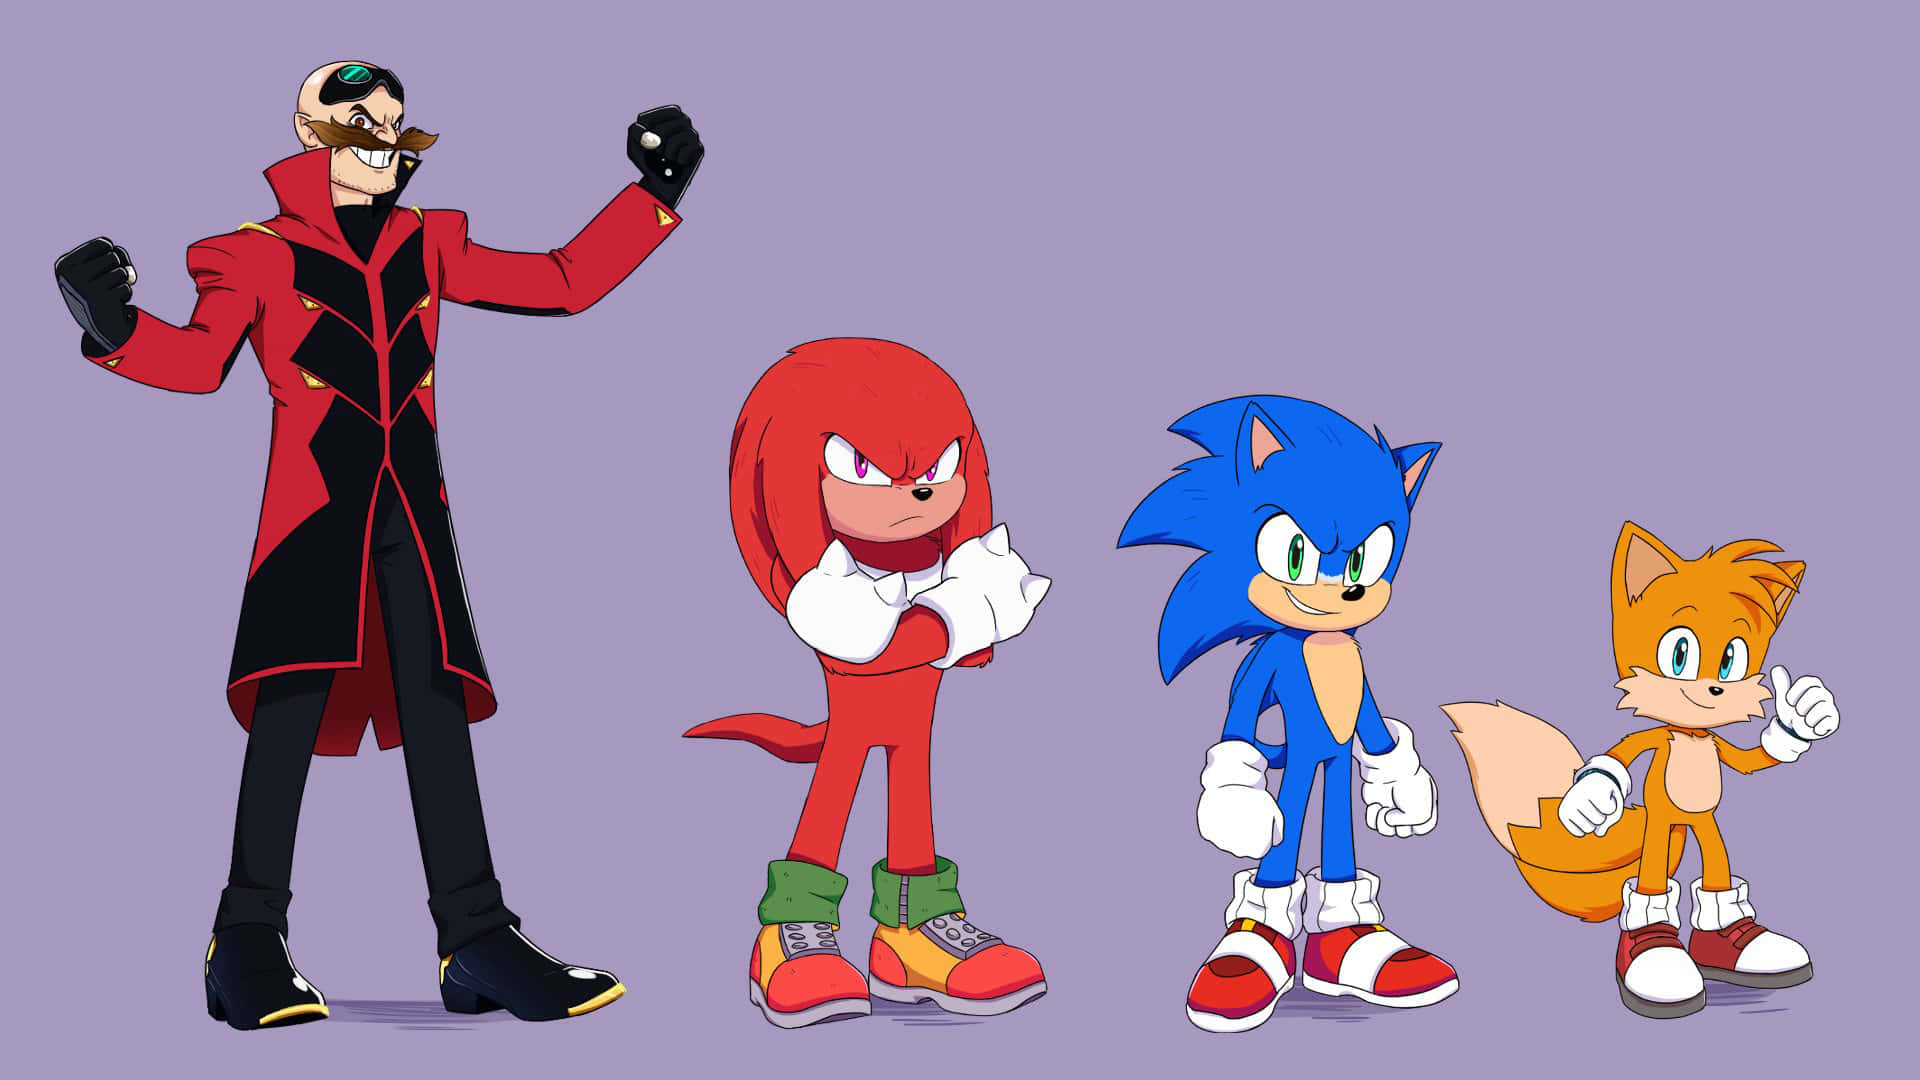 Eggman, Knuckles, Tails, And Sonic Illustration Wallpaper